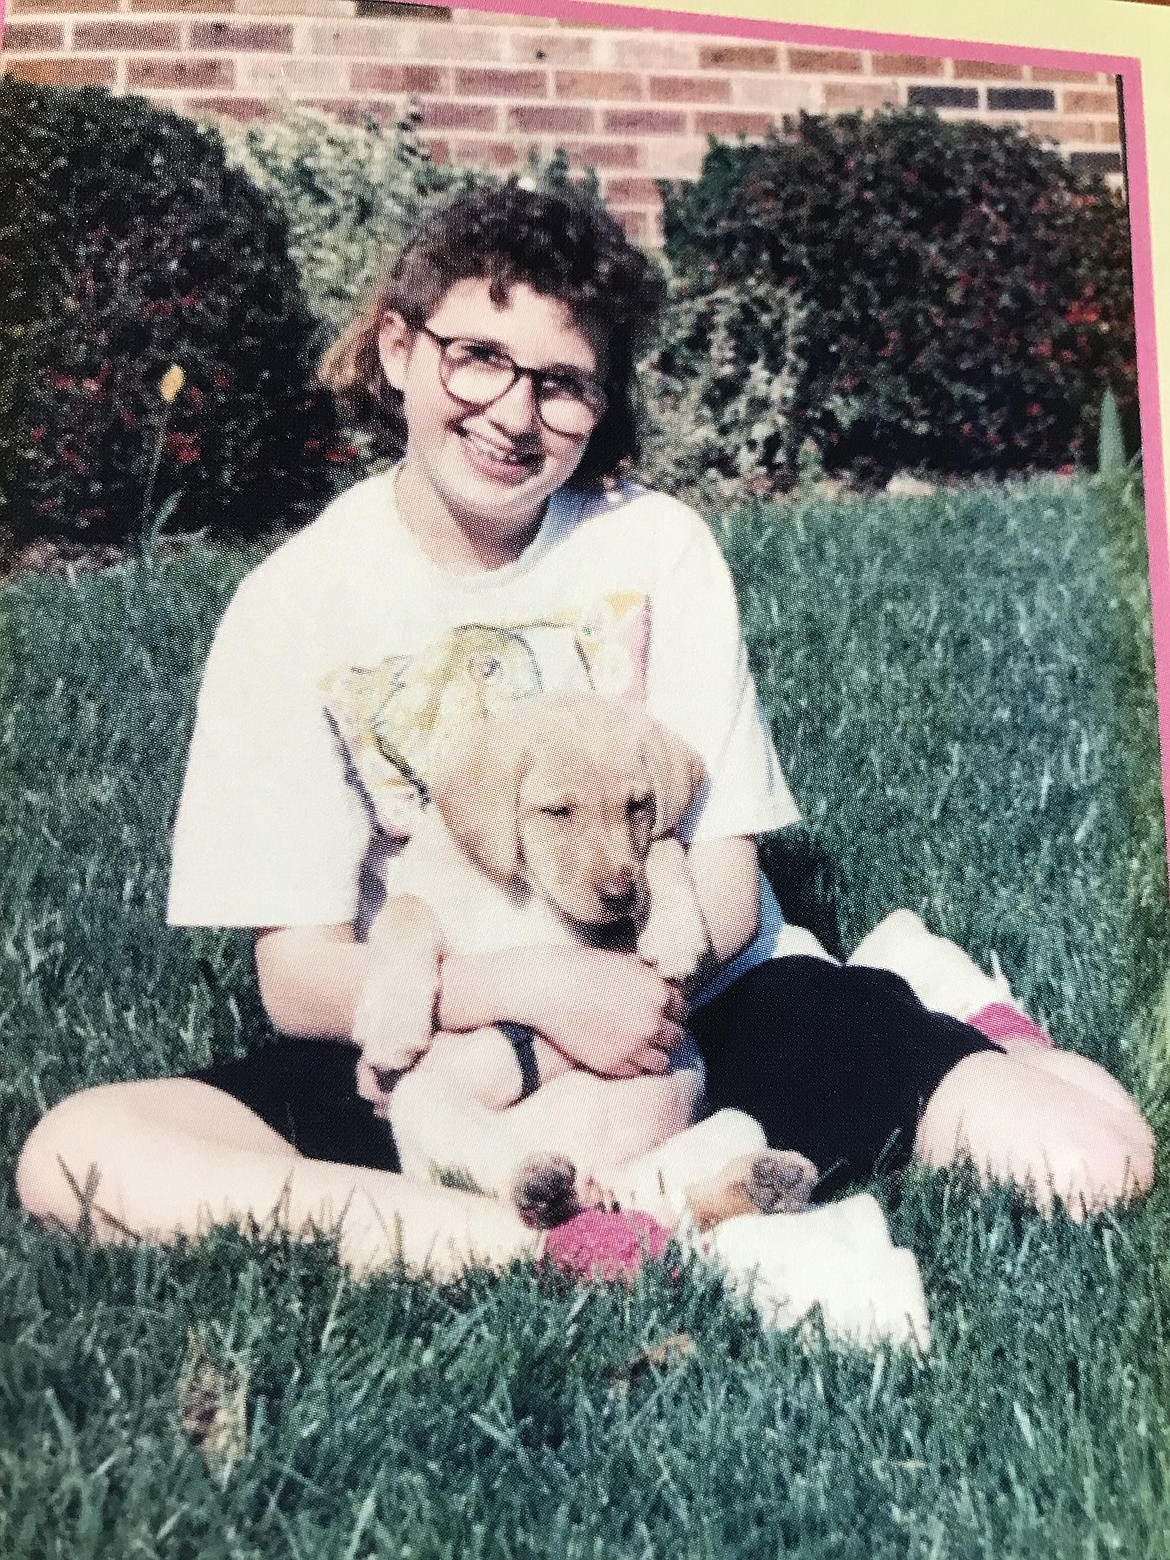 Jennifer Schroeder, 12, daughter of Hayden Lake couple Jim and Melissa Schroeder, is seen here with her beloved canine companion Lucy in 1990 in Germantown, Md. Before this photo was taken, Jen was in a coma in a Washington, D.C., hospital where first lady Barbara Bush, who died Tuesday, stopped in unannounced to read to kids in the children&#146;s unit. Jen fully recovered from the allergic reaction that hospitalized her, but was tragically killed at a young age. &#147;Throughout Jen&#146;s medical ordeal, we promised her anything she wanted if she would just wake up and be our spunky Jen,&#148; Melissa told The Press. &#147;Well, while in her coma she remembered our promise and asked for a puppy. We got Jen a yellow Lab, and she named her Lucy after her ICU nurse.  Both Jen and Lucy were killed in a car accident March 21, 2000, after a day of playing fetch on the Oregon Coast.&#148;

Courtesy photo